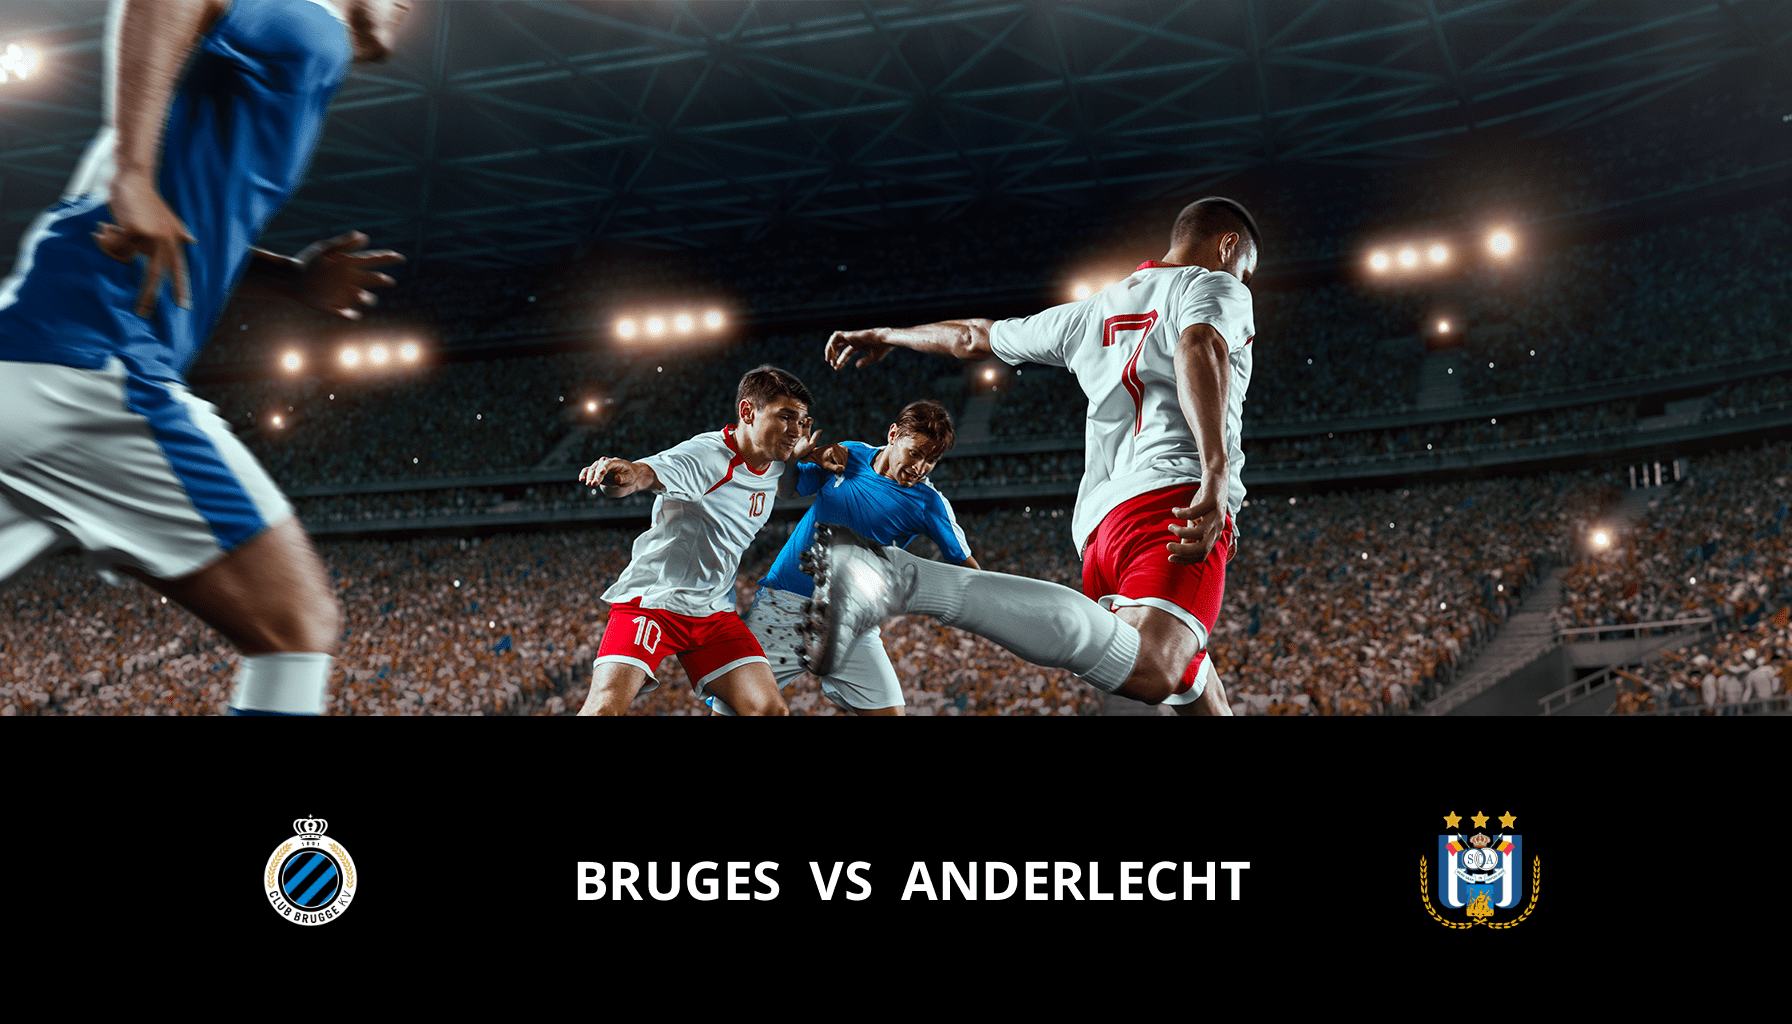 Previsione per Club Brugge VS Anderlecht il 25/02/2024 Analysis of the match